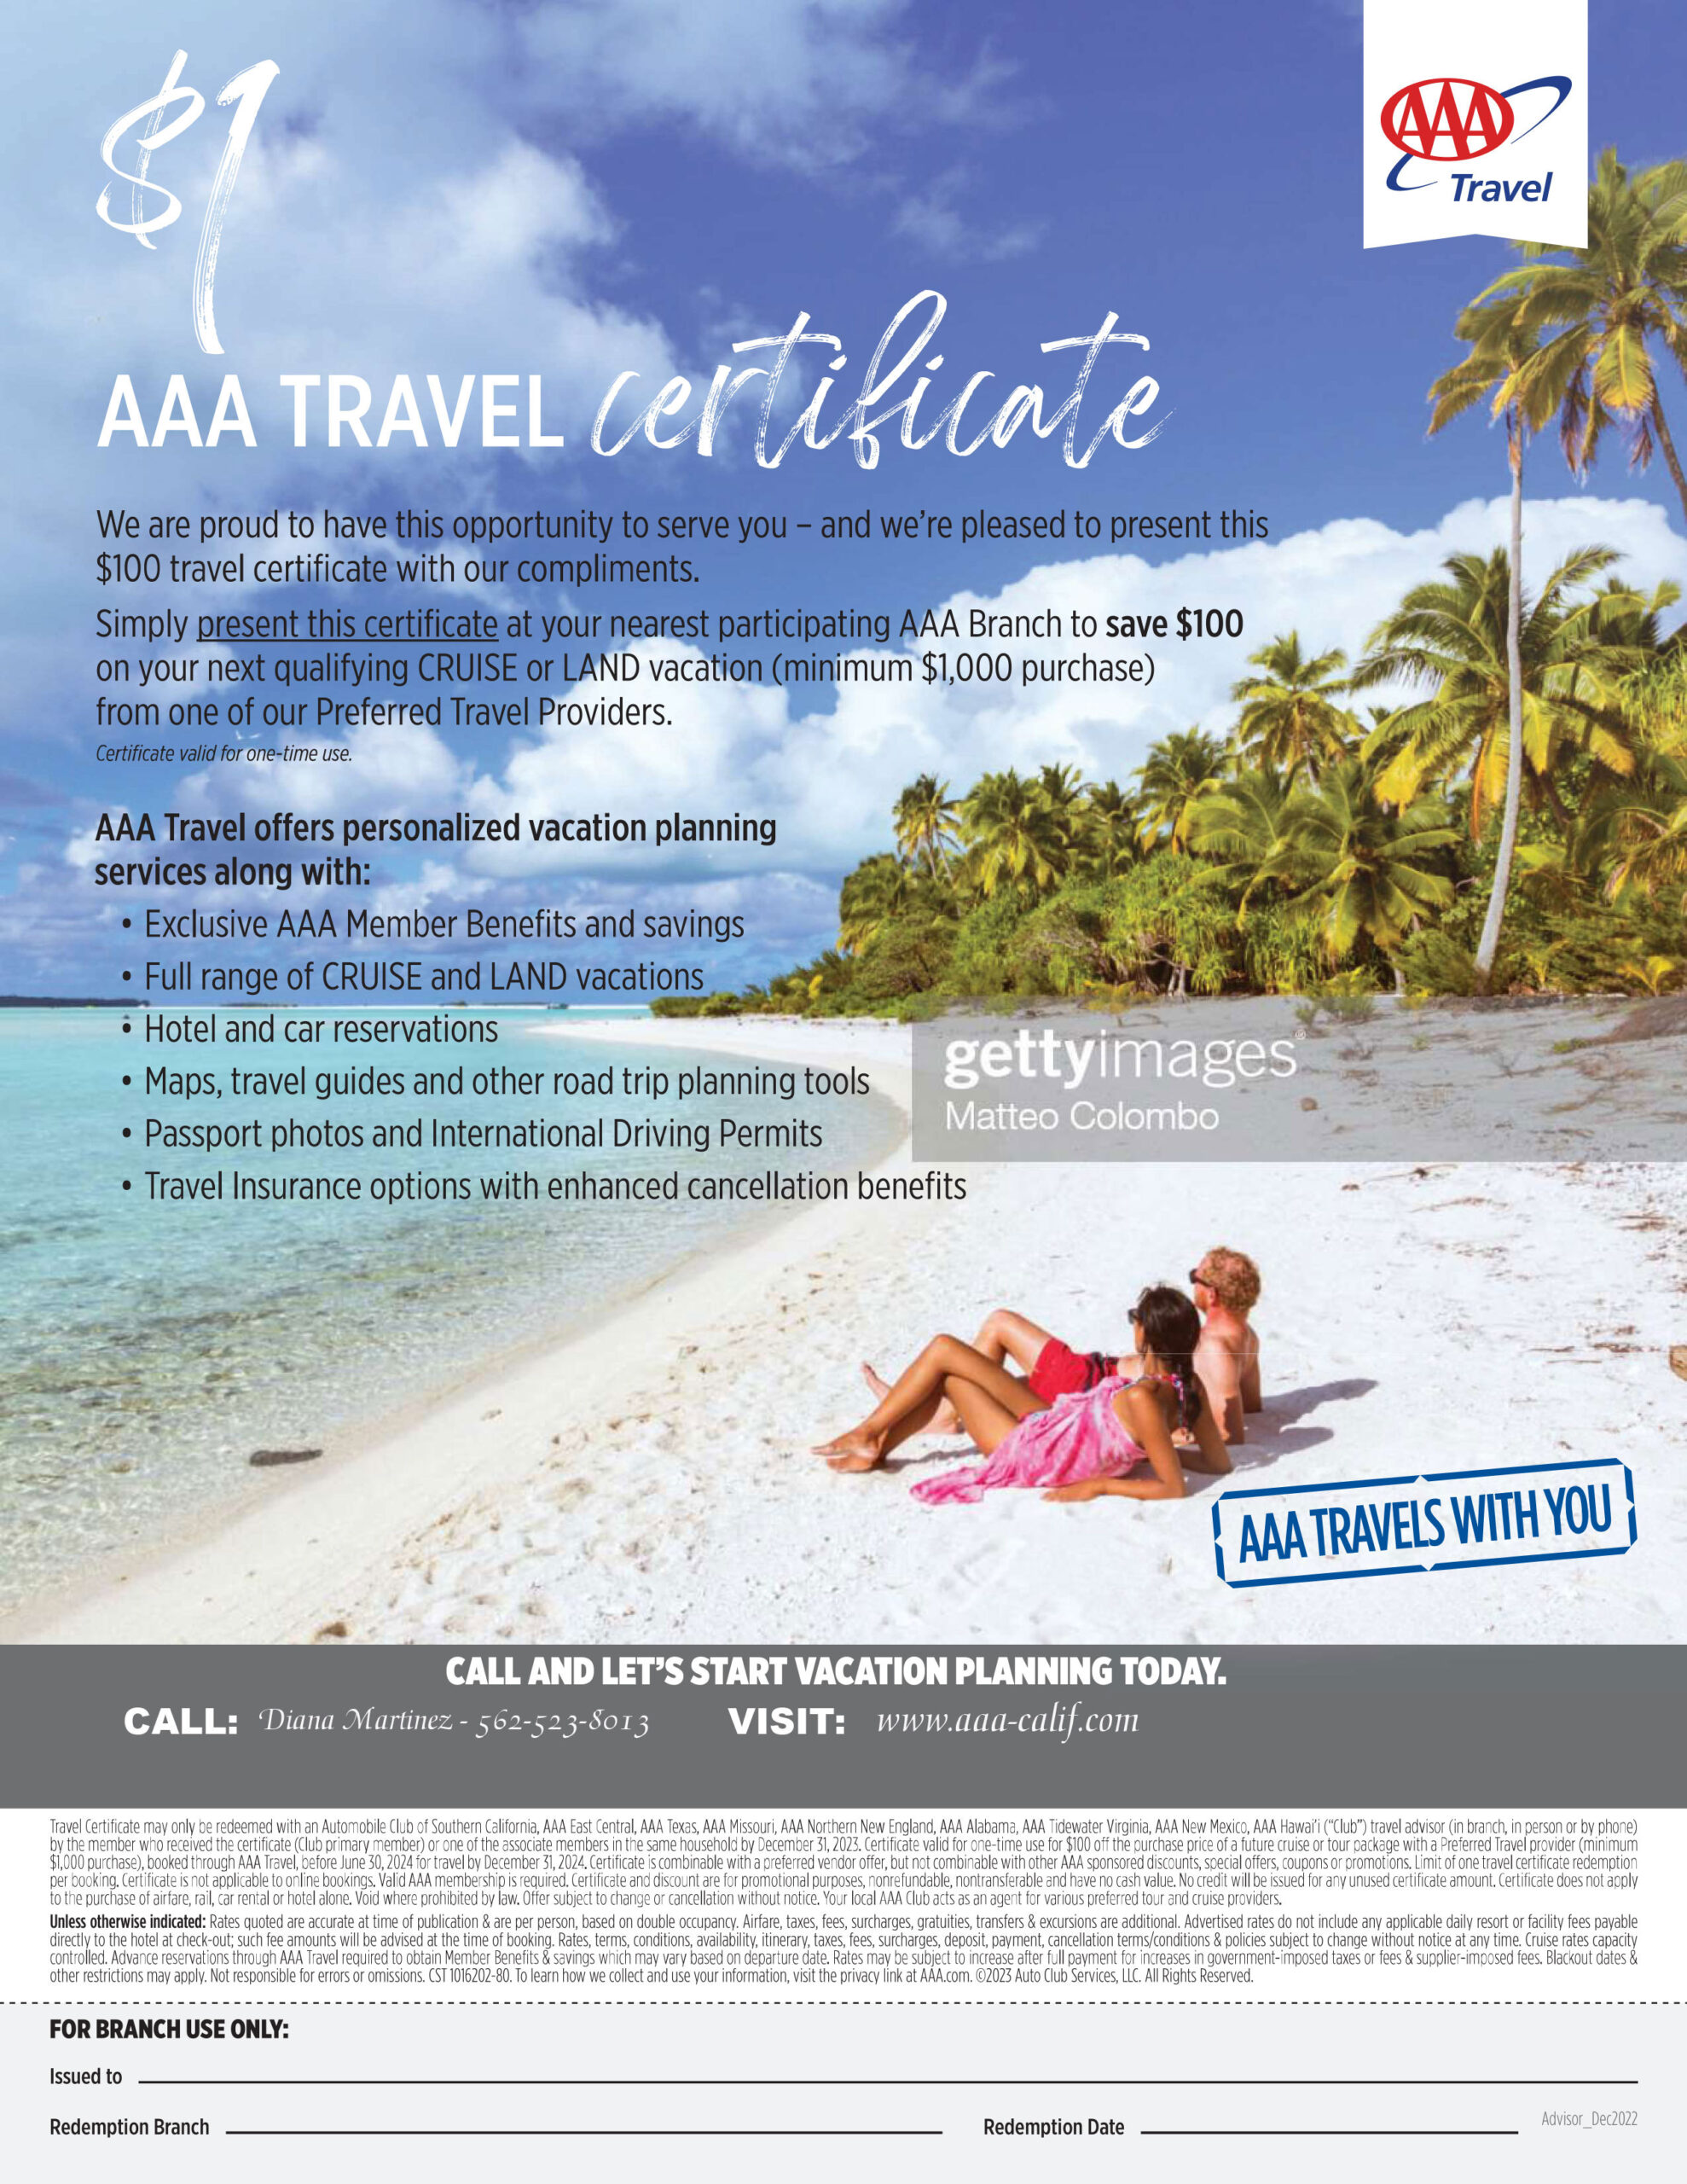 AAA Travel Certificate for discounts